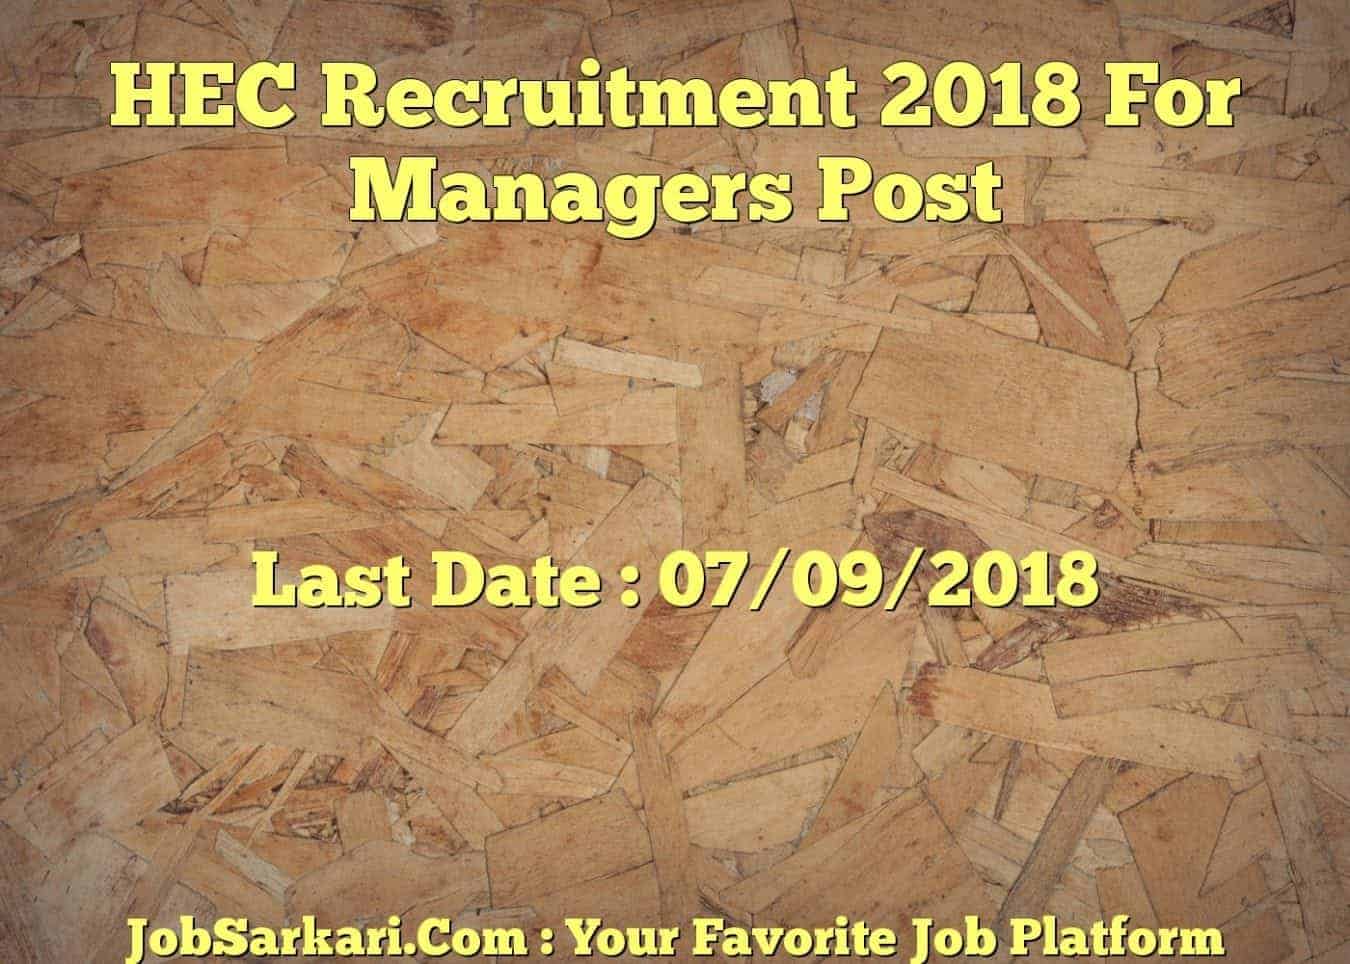 HEC Recruitment 2018 For Managers Post